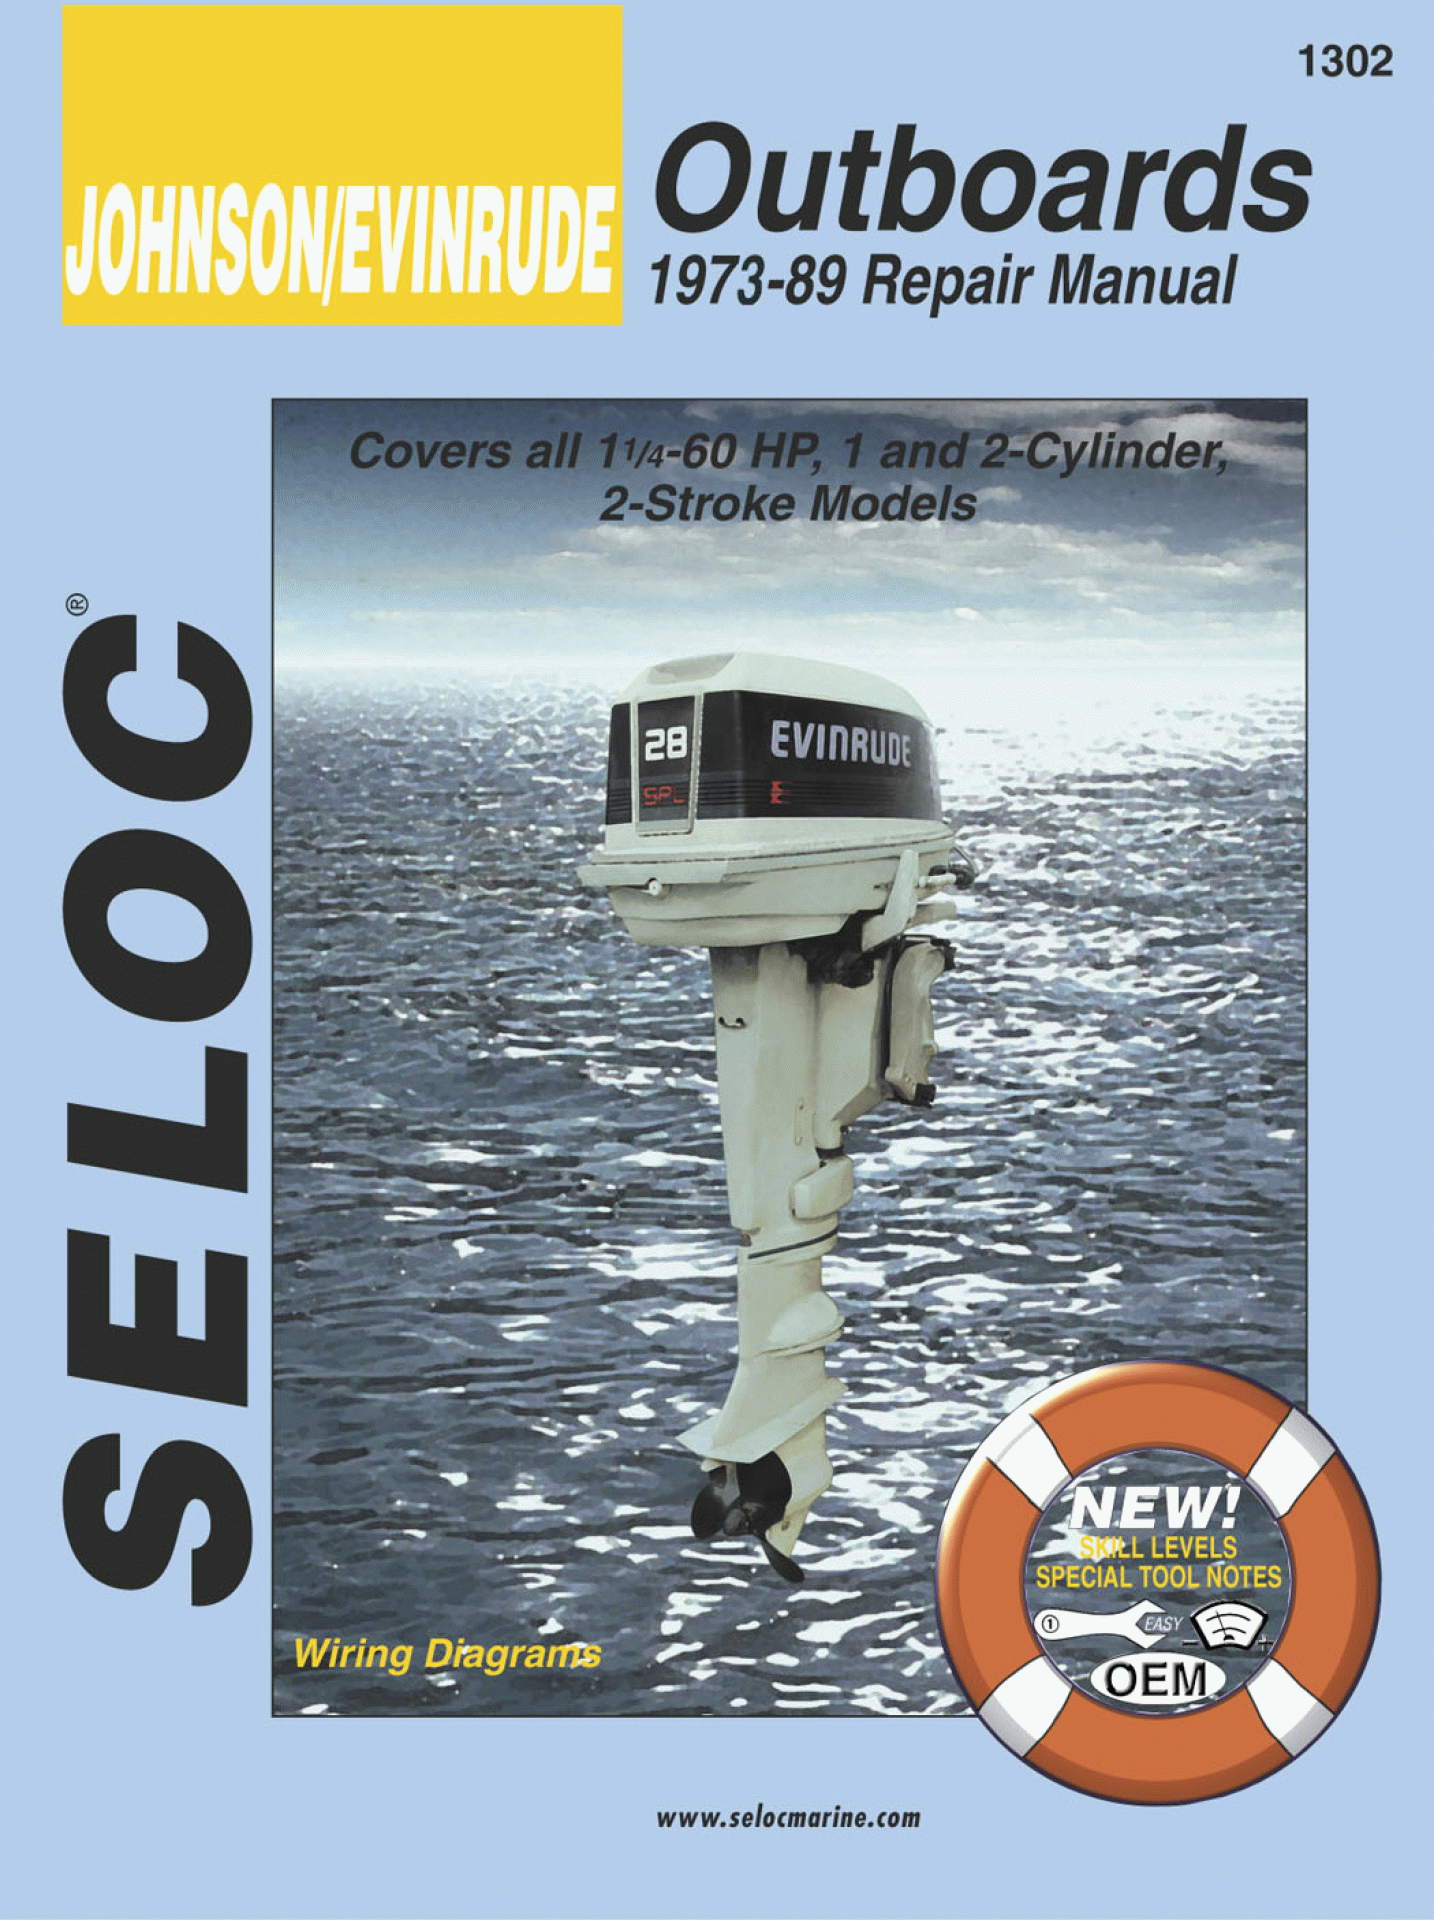 SELOC PUBLISHING | 18-01302 | REPAIR MANUAL Johnson/Evinrude Outboards 1-2 Cyl 1973-89